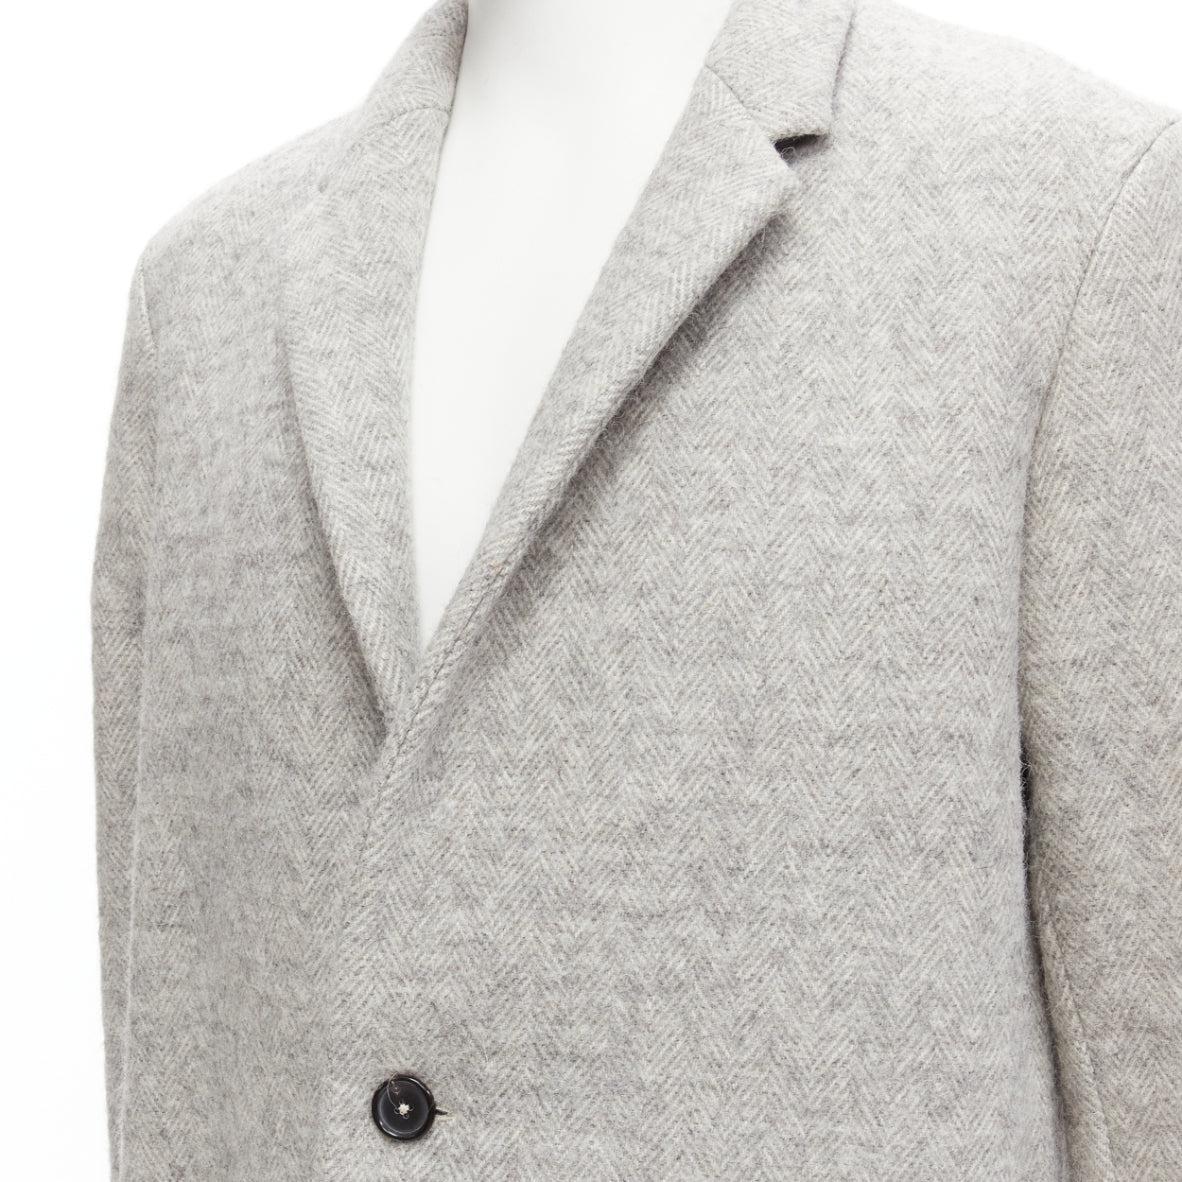 JIL SANDER grey virgin wool mohair alpaca blend minimalist coat IT48 M
Reference: JSLE/A00024
Brand: Jil Sander
Material: Virgin Wool, Blend
Color: Grey
Pattern: Solid
Closure: Button
Lining: Black Fabric
Made in: Italy

CONDITION:
Condition: